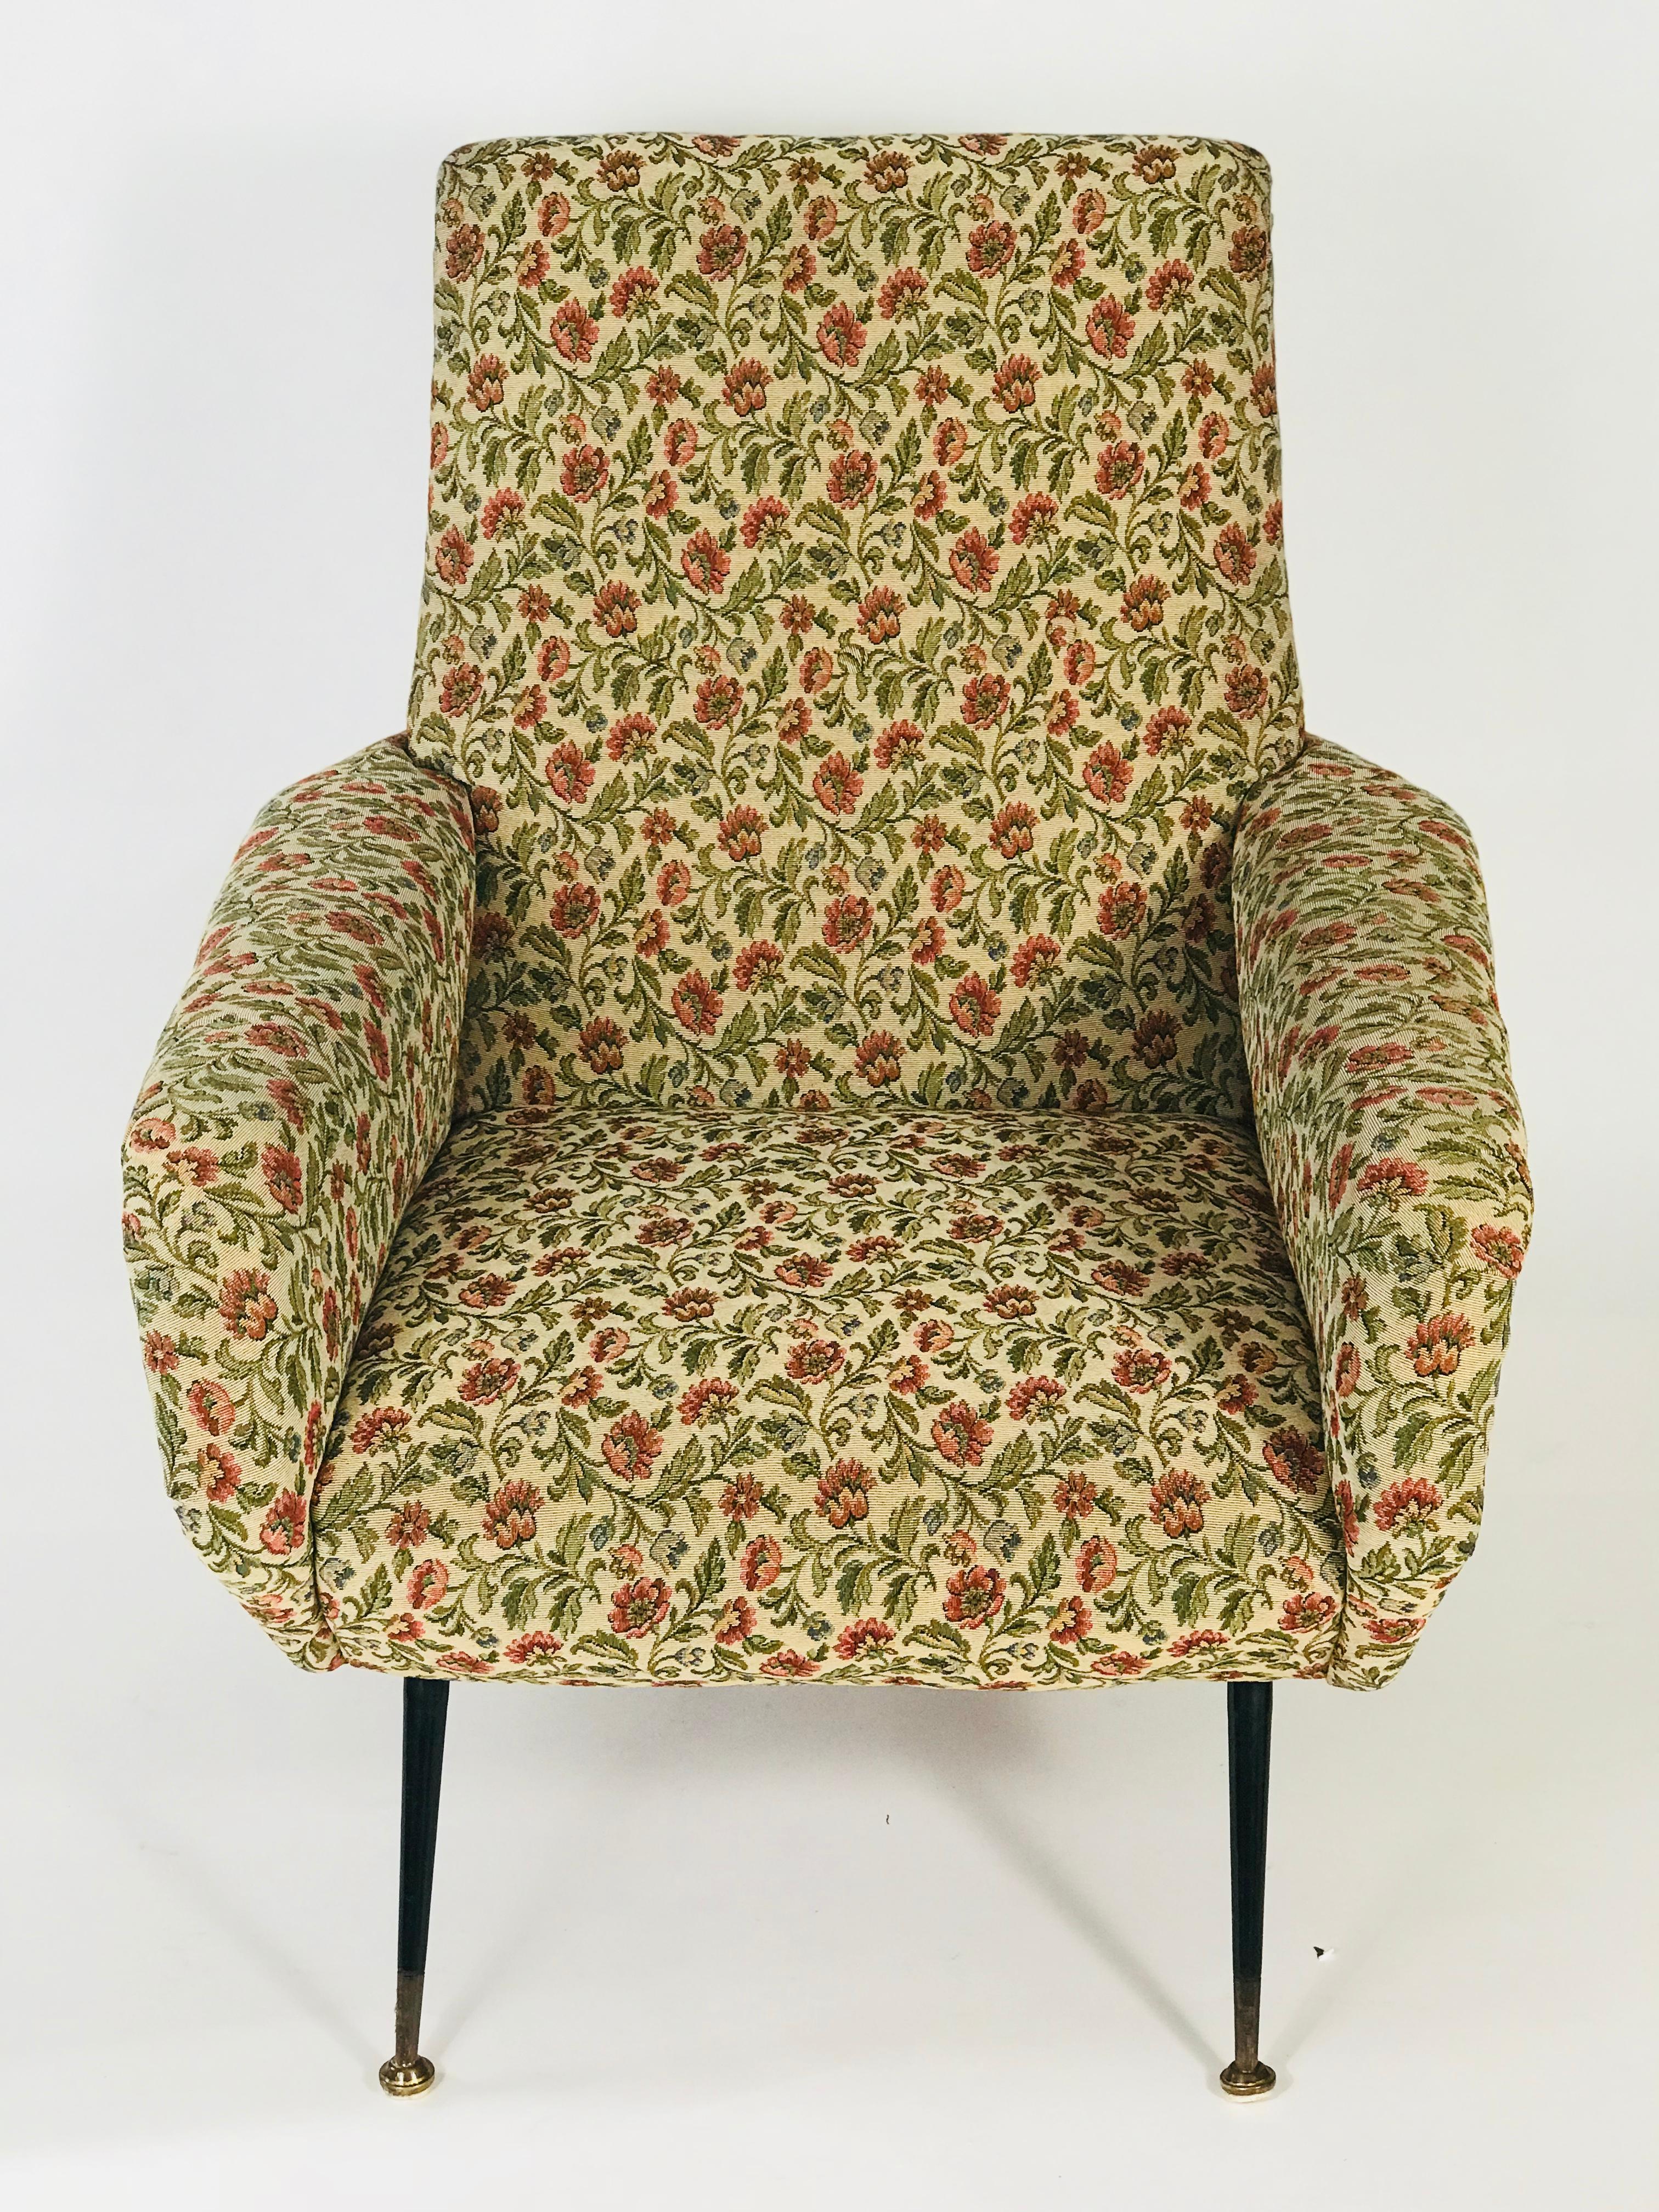 A pair of Italian midcentury lounge chairs upholstered in the original 1950s woven floral tapestry with two button-tufts, raised on metal legs with brass sabots, circa 1950. Arrived out a home in Rome. These chairs are substantial and well made.